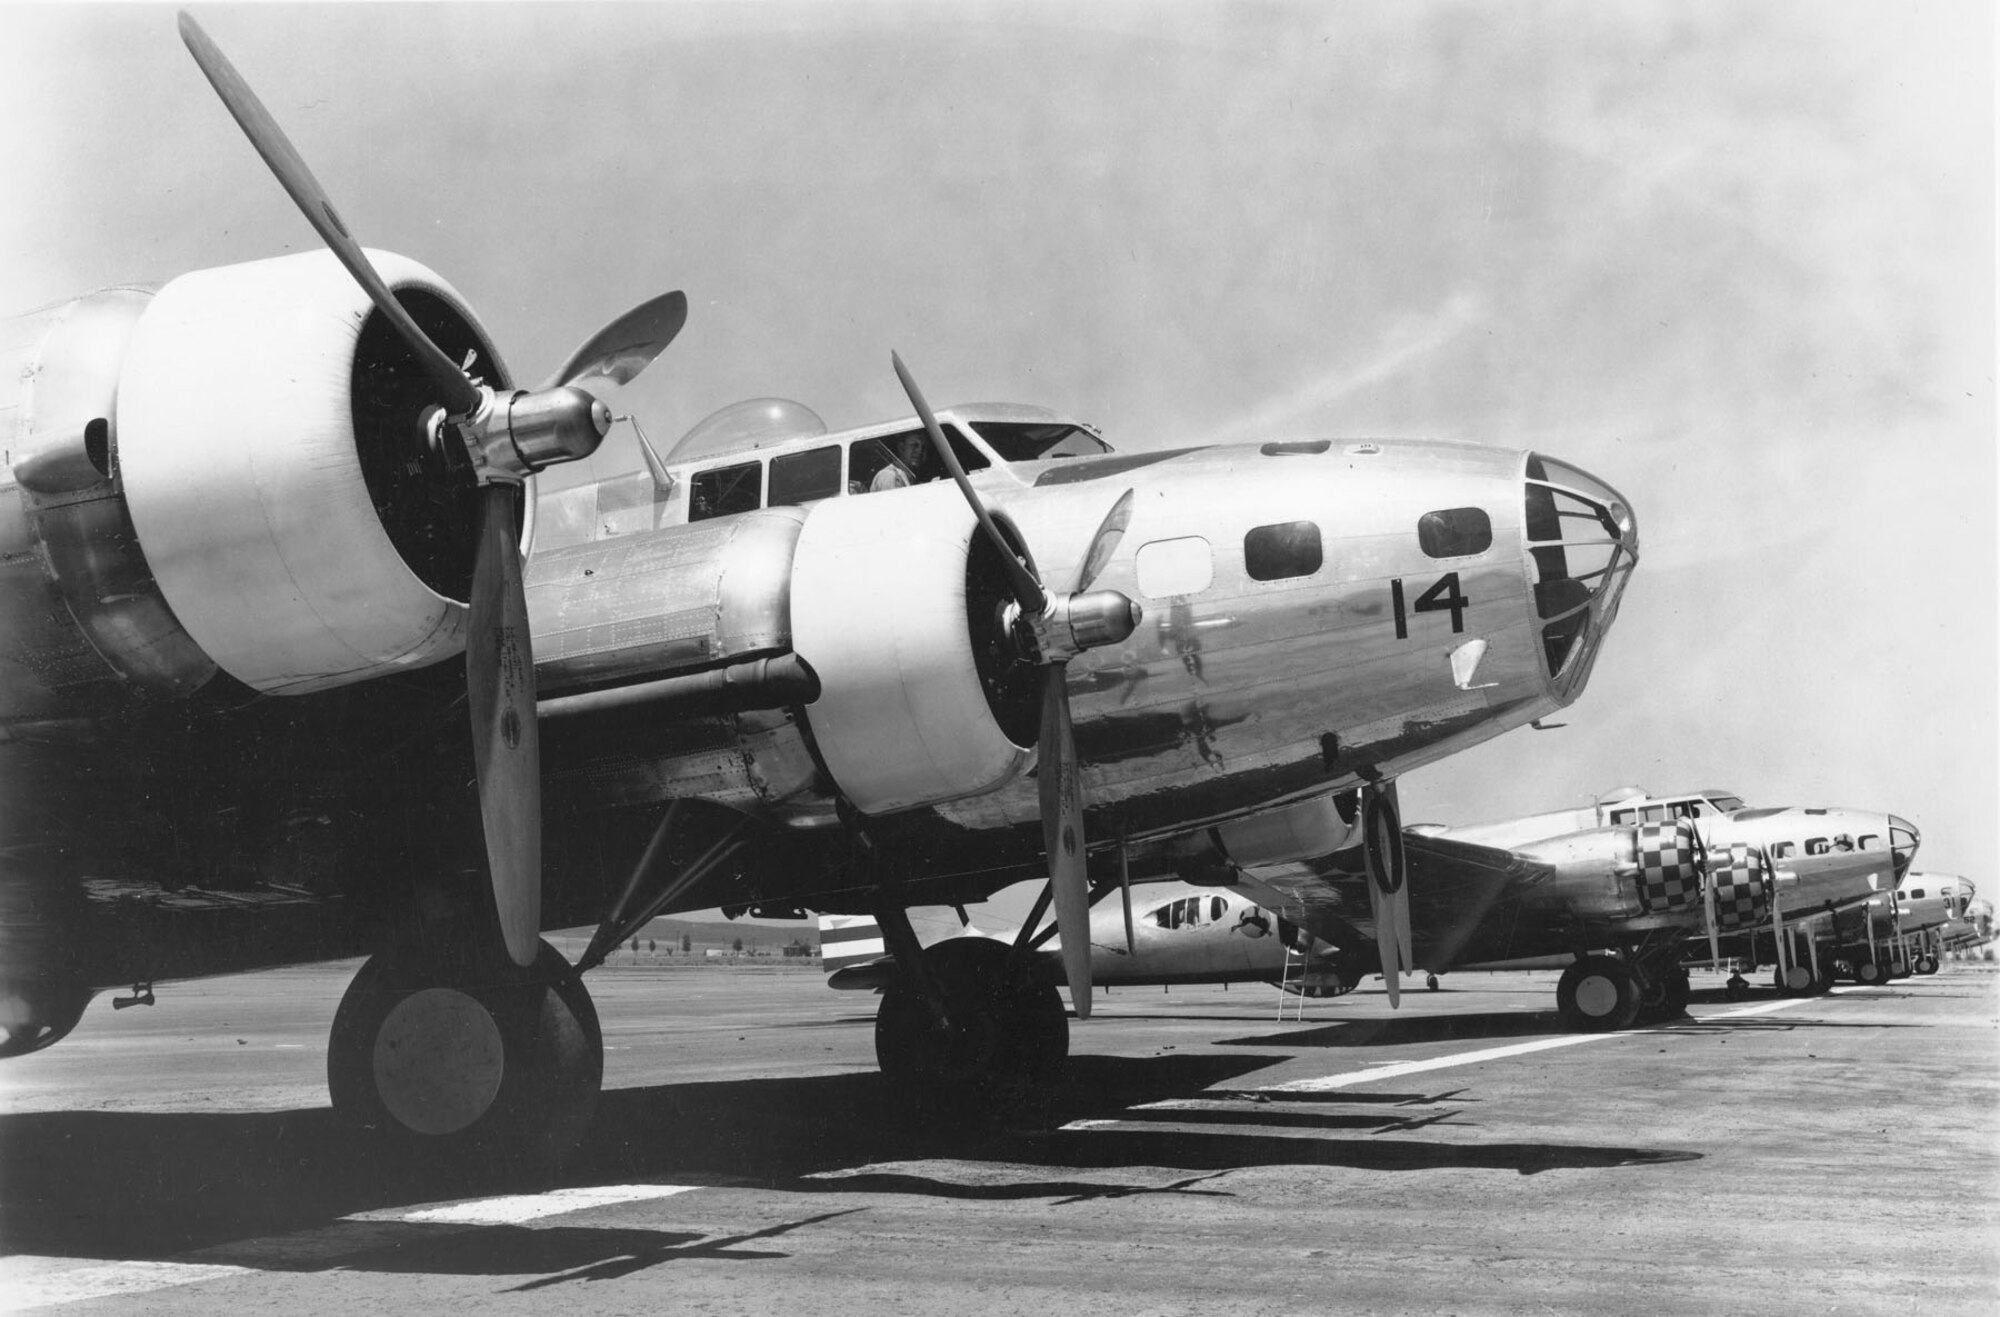 Boeing B-17Bs at Marshall Field, Calif., prior to Pearl Harbor. (U.S. Air Force photo)